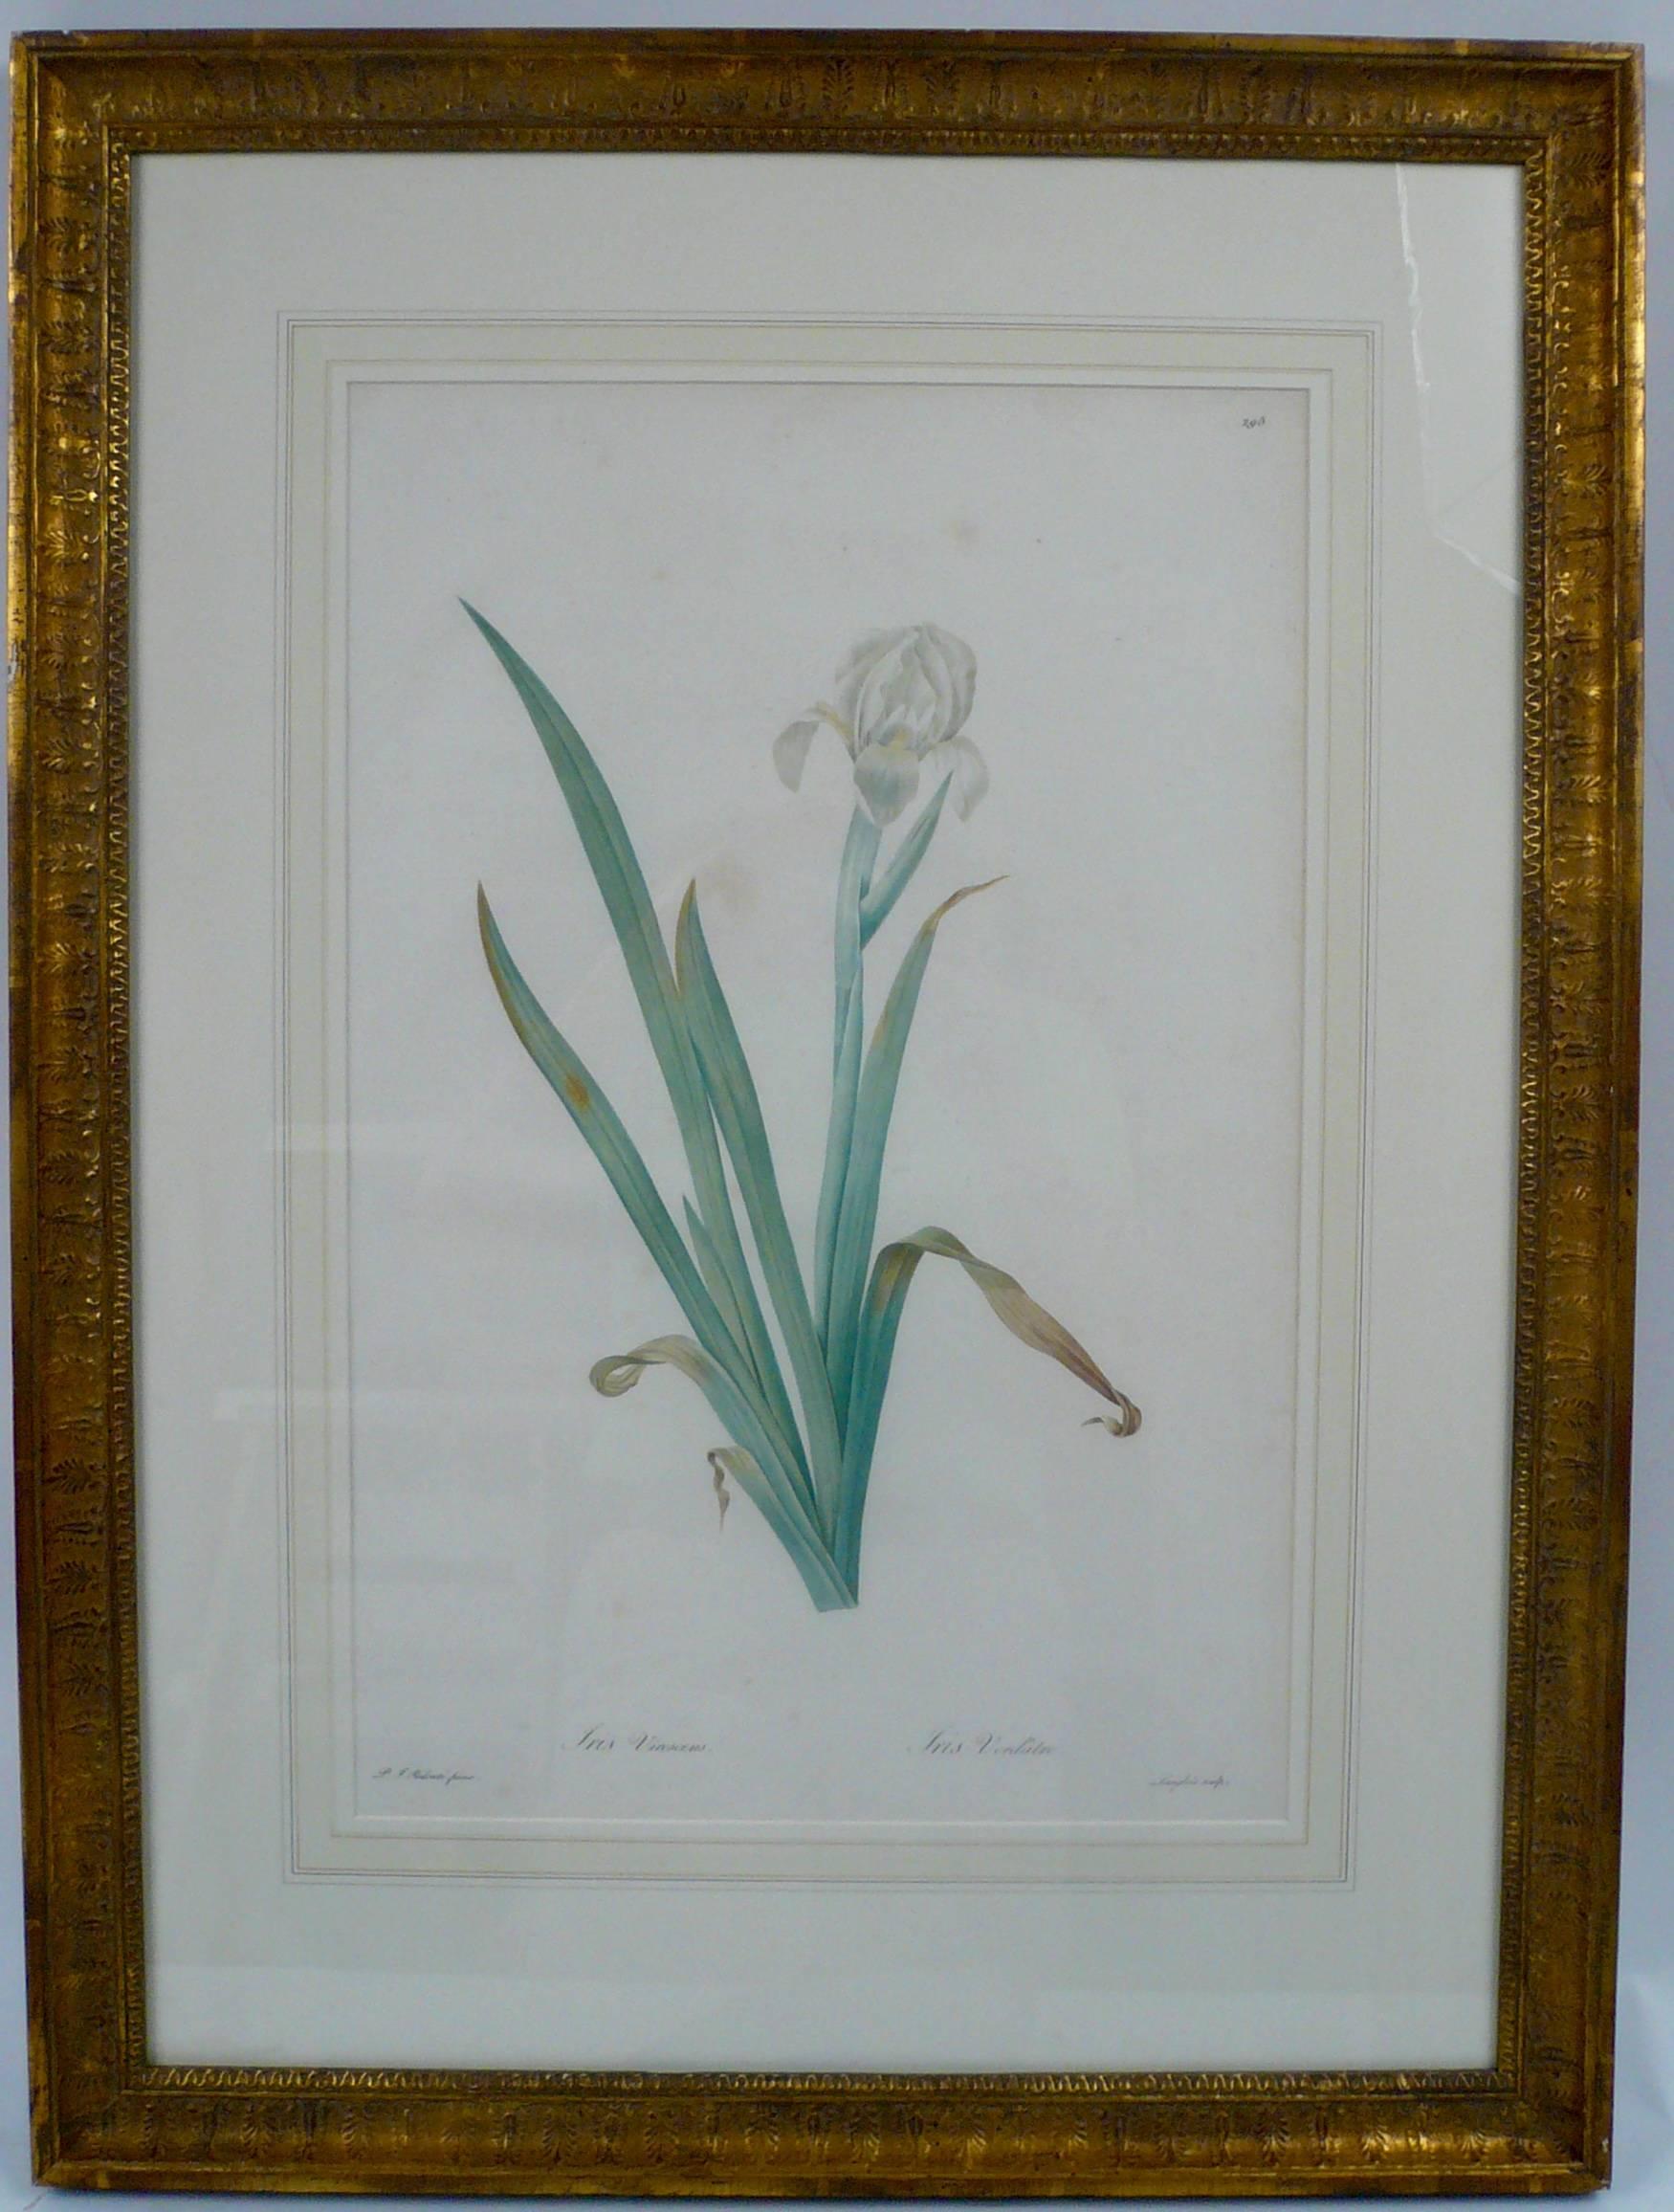 This pair of botanical prints from Pierre Joseph Redoute's 'Les Liliacees,' are beautifully colored and tastefully custom framed and matted.